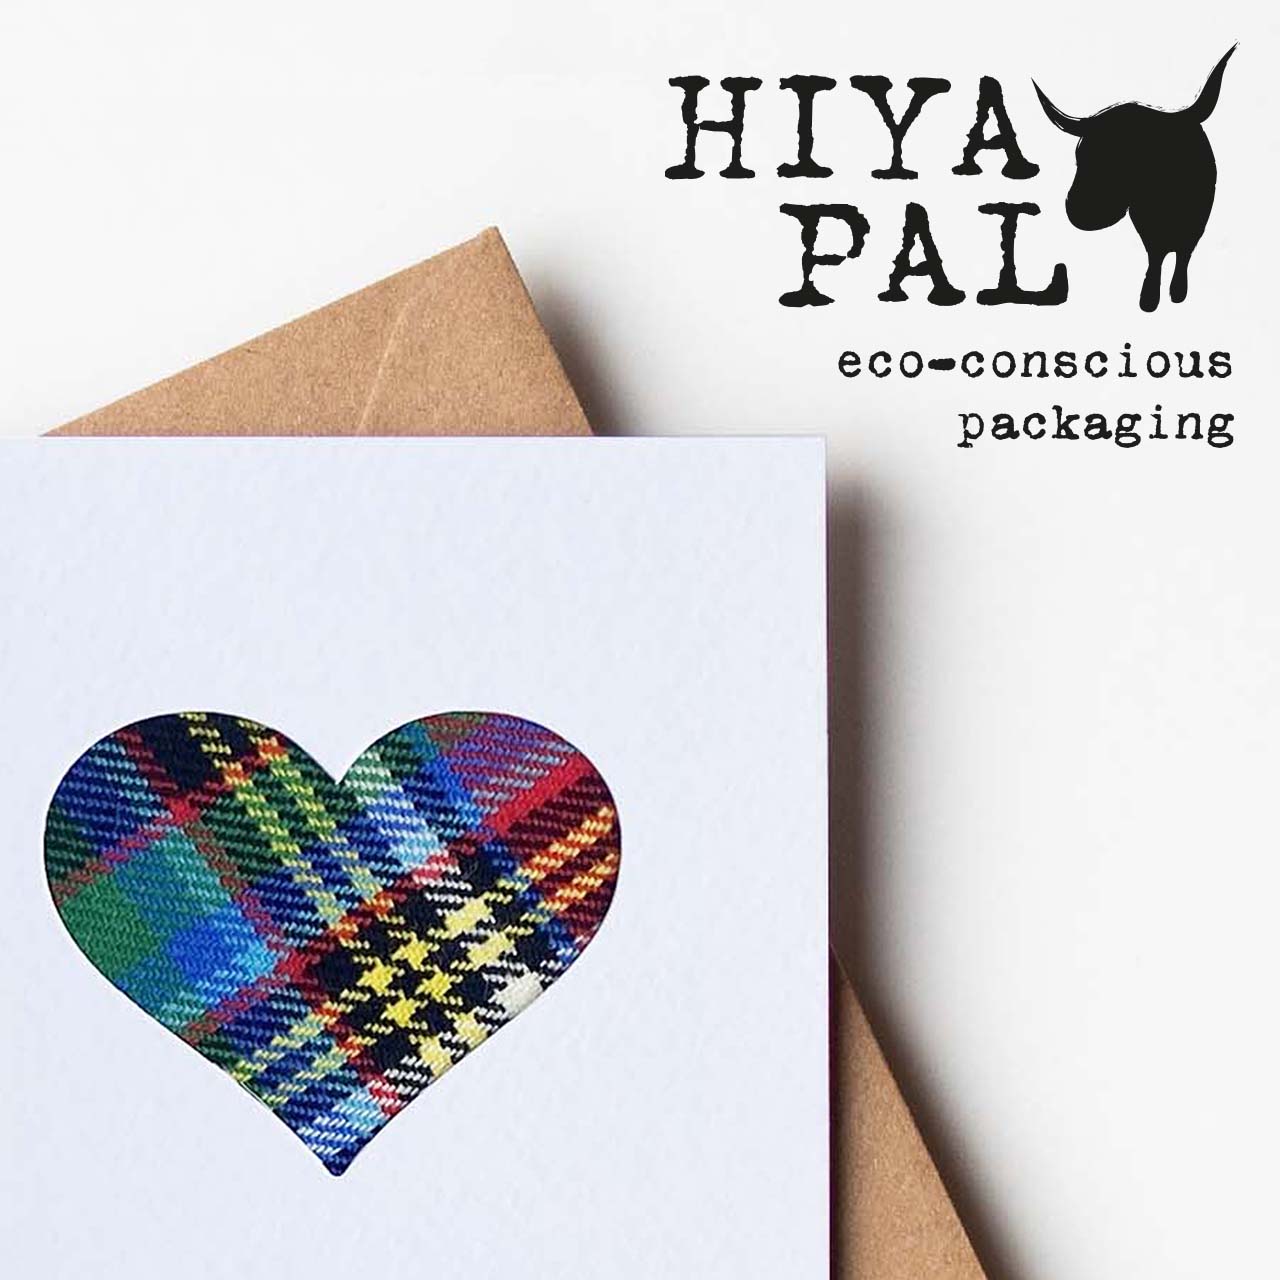 4 Printed Scottish Cards for £10